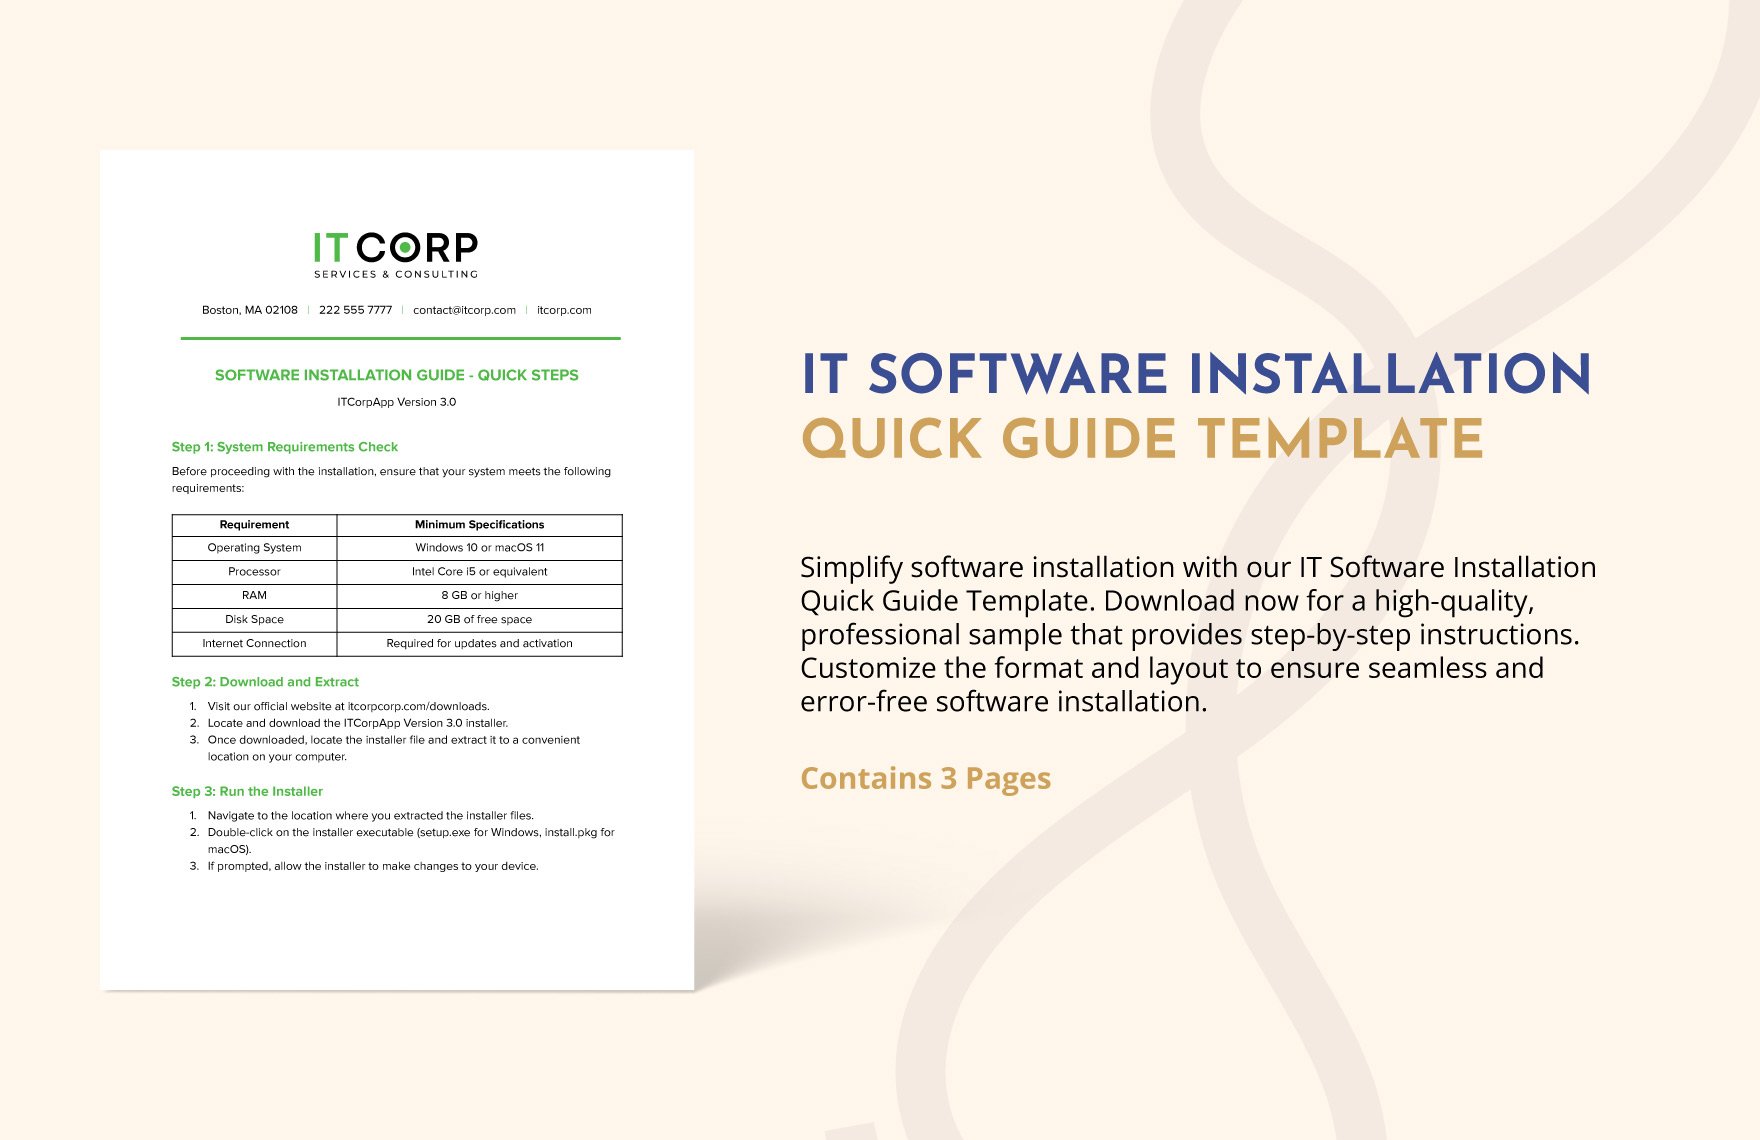 IT Software Installation Quick Guide Template